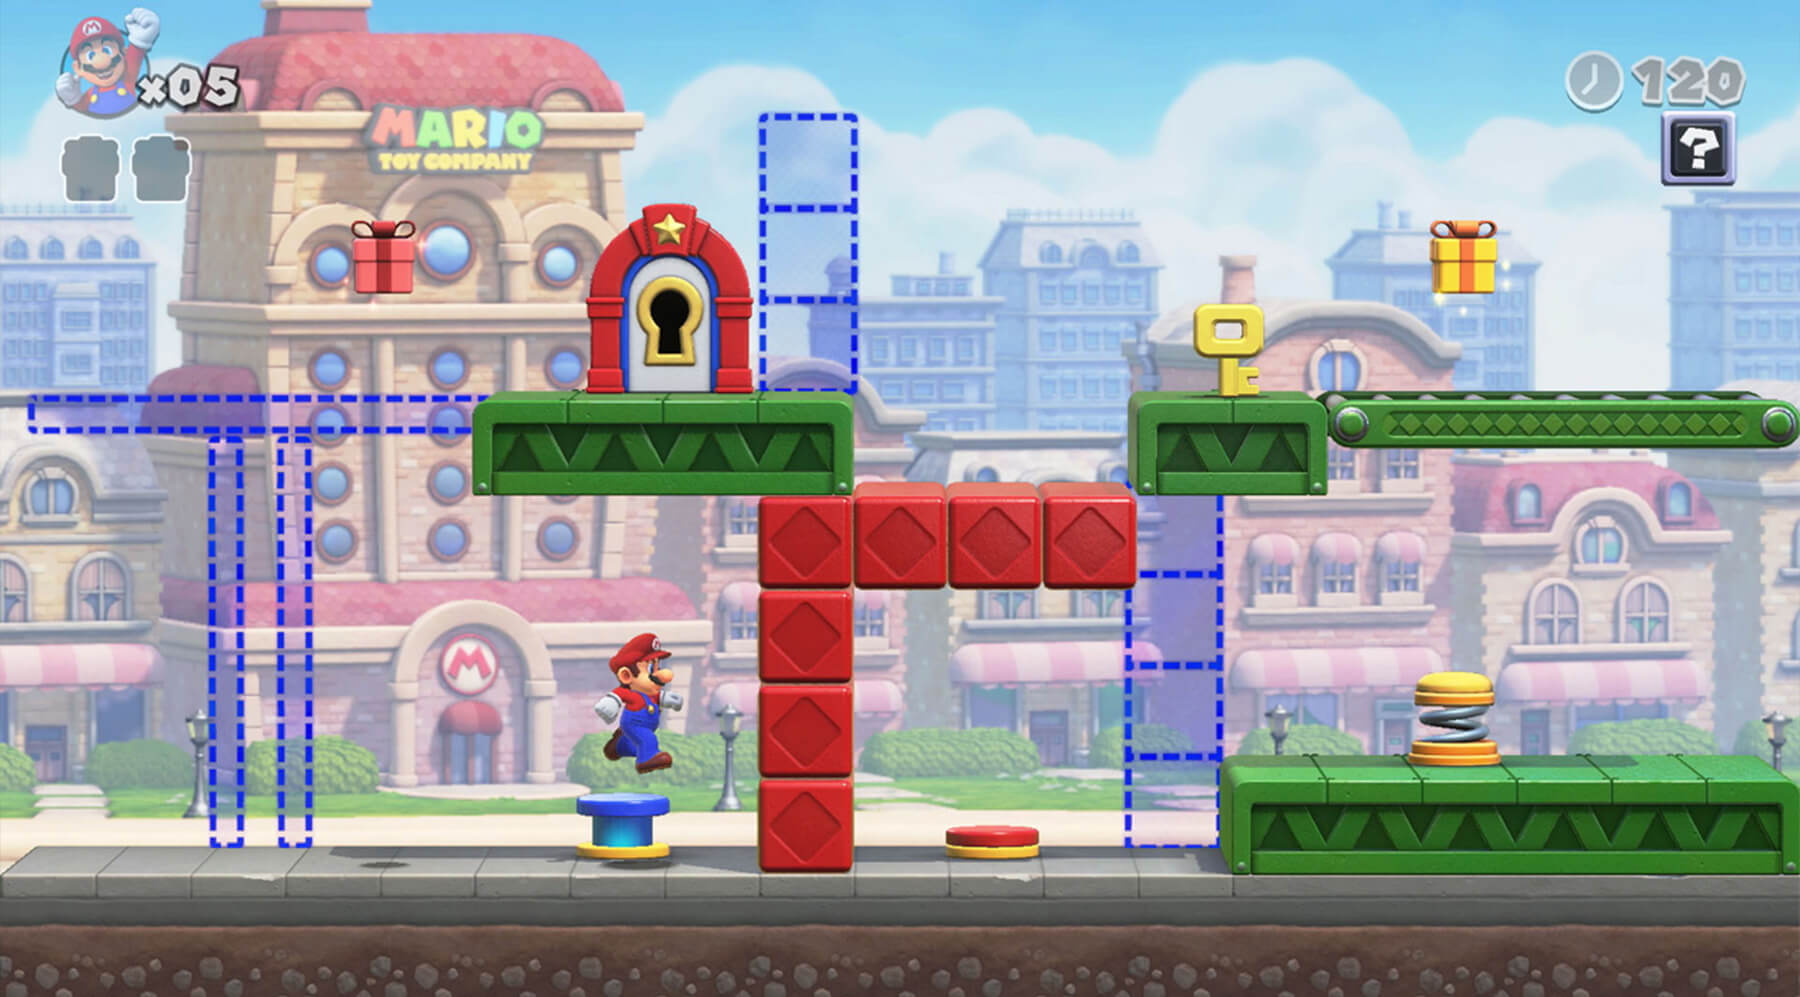 Mario jumps on top of a blue button in a screenshot from Mario Vs. Donkey Kong for the Switch.